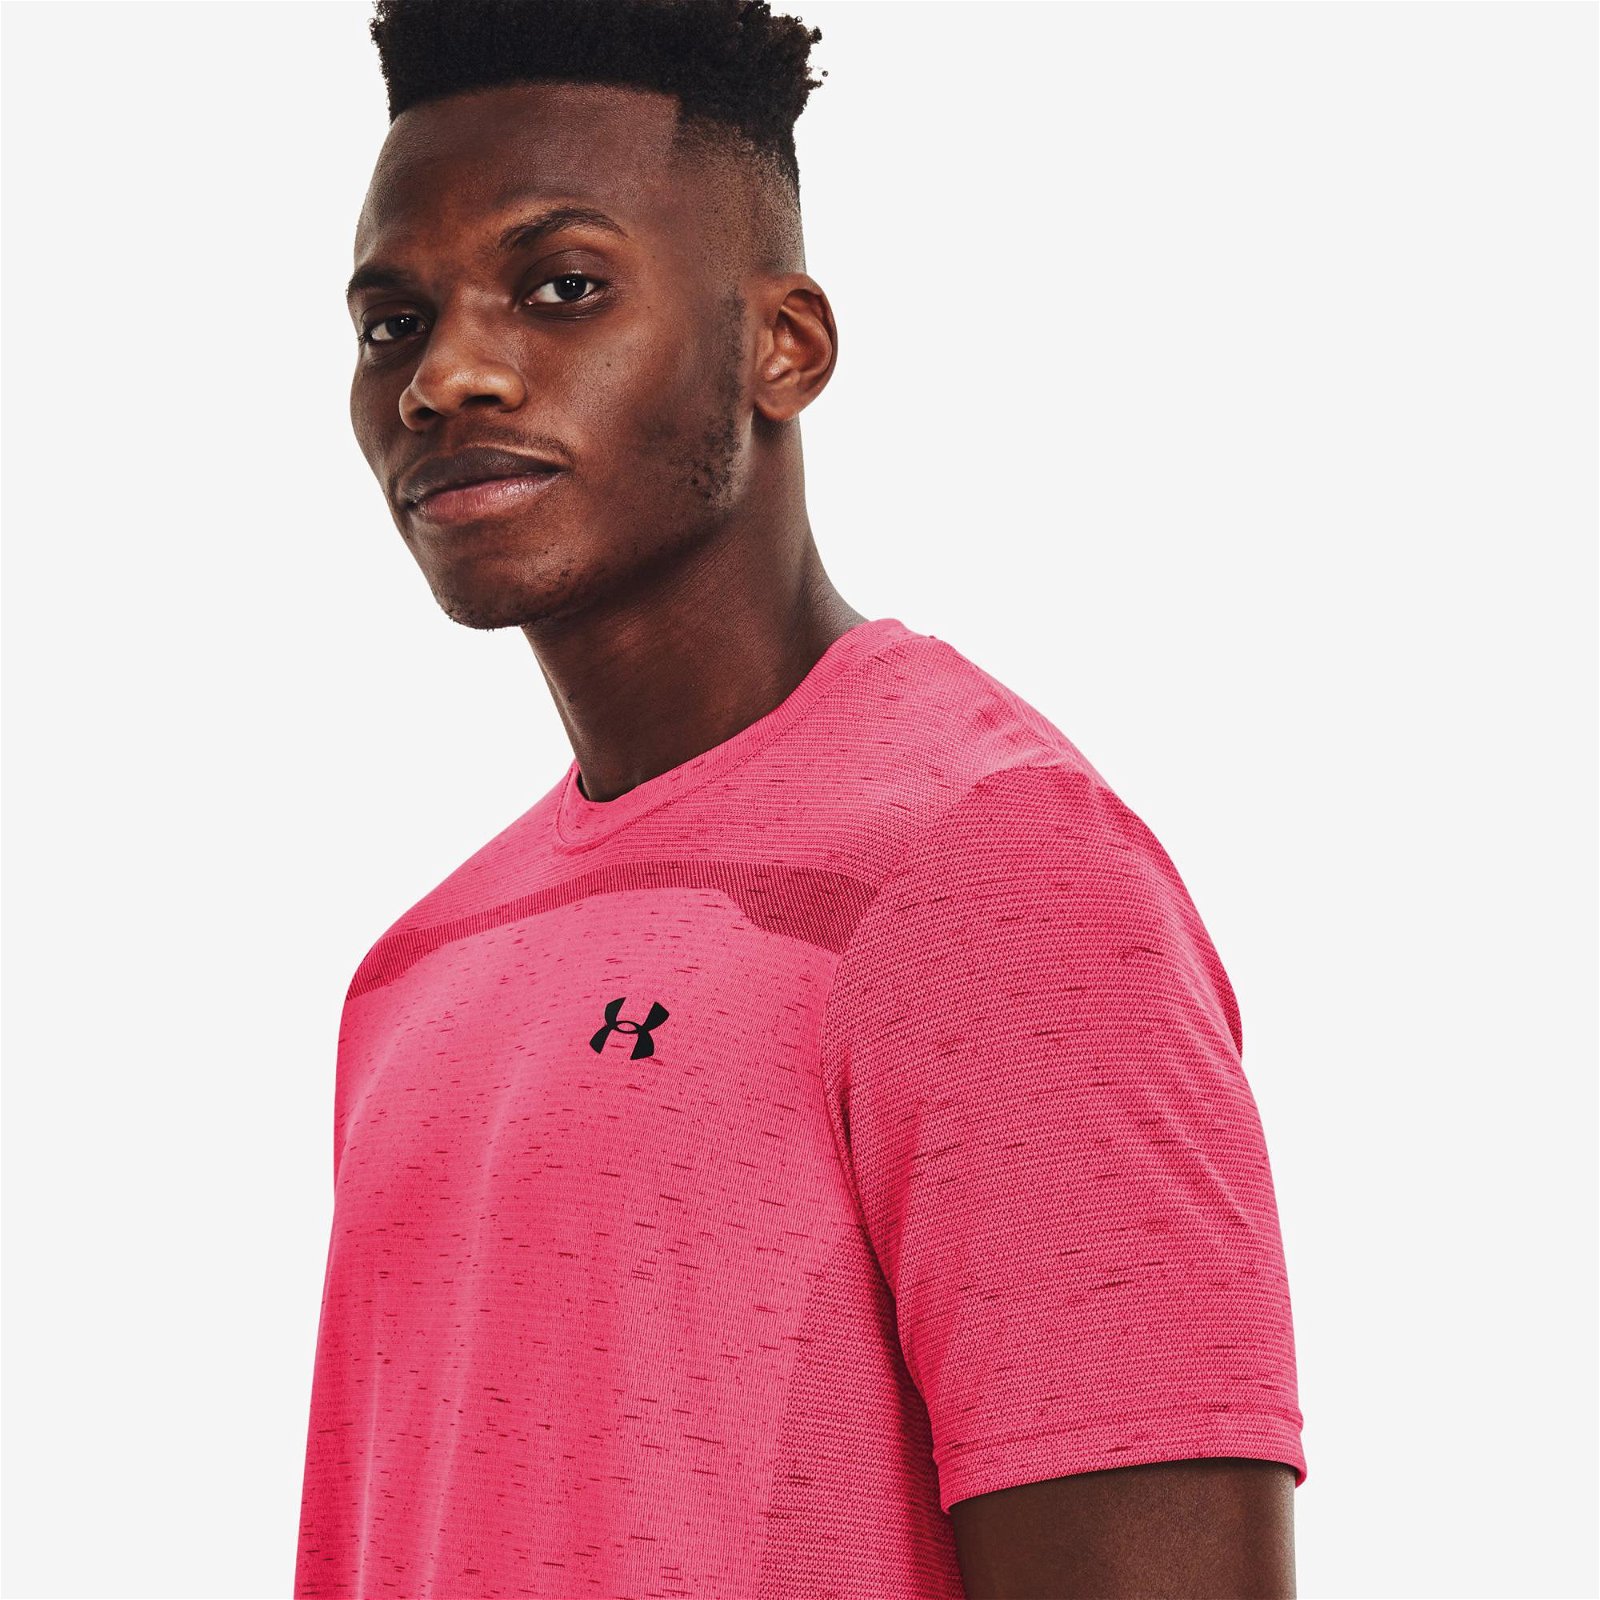 Under Armour Seamless Pembe T-Shirt